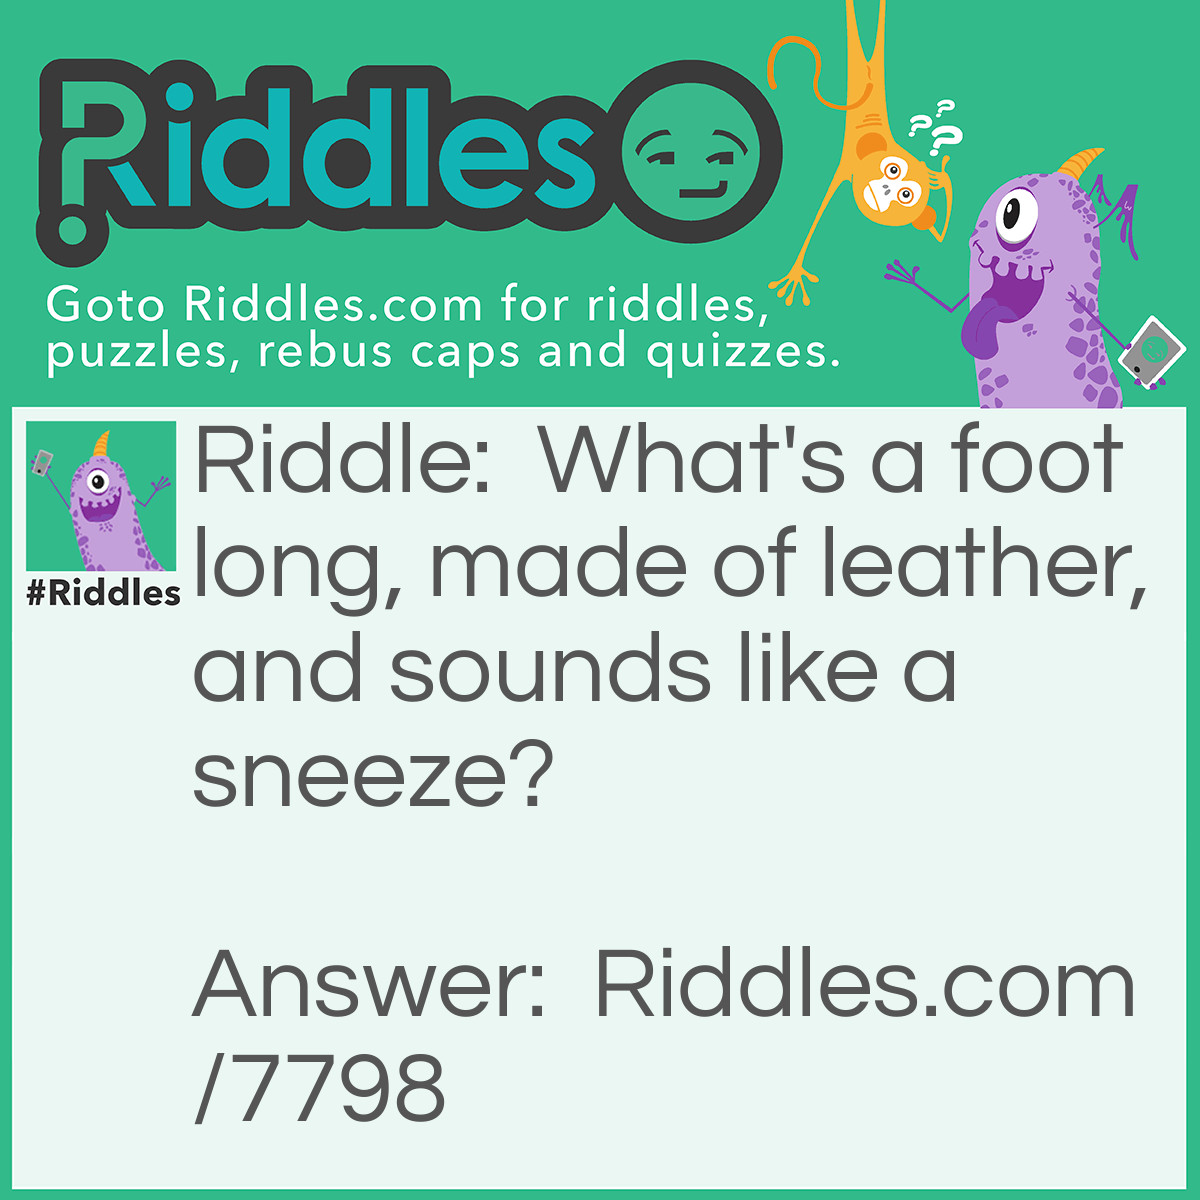 Riddle: What's a foot long, made of leather, and sounds like a sneeze? Answer: A Shoe.